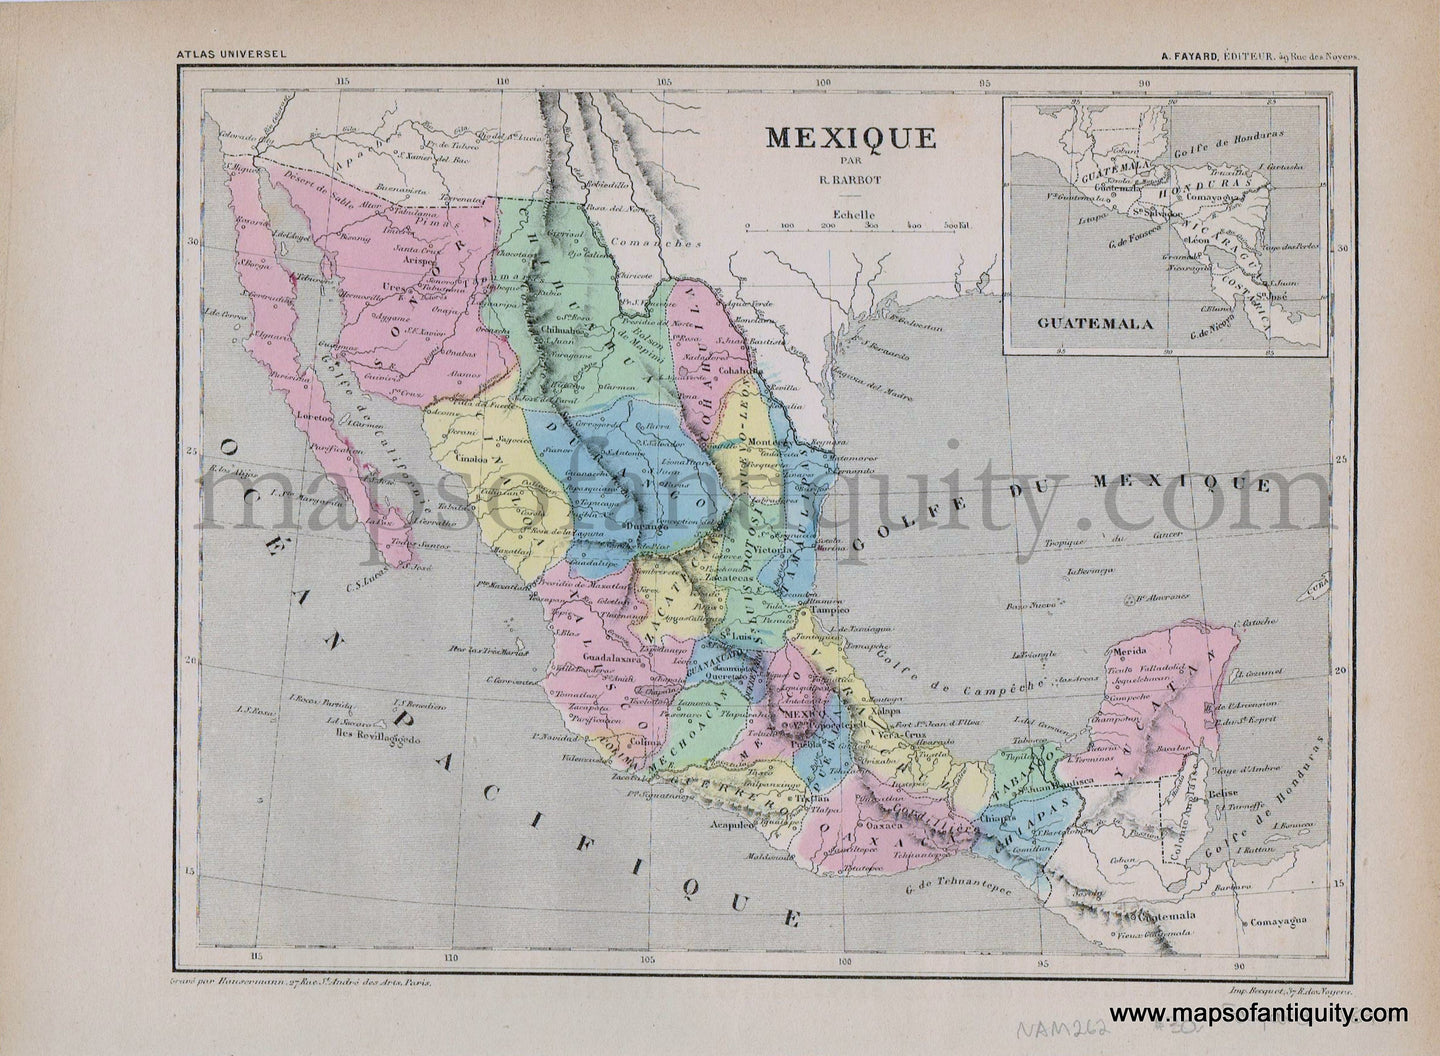 Antique-Printed-Color-Map-North-America-Mexique---Mexico-1877-Fayard-Mexico-1800s-19th-century-Maps-of-Antiquity